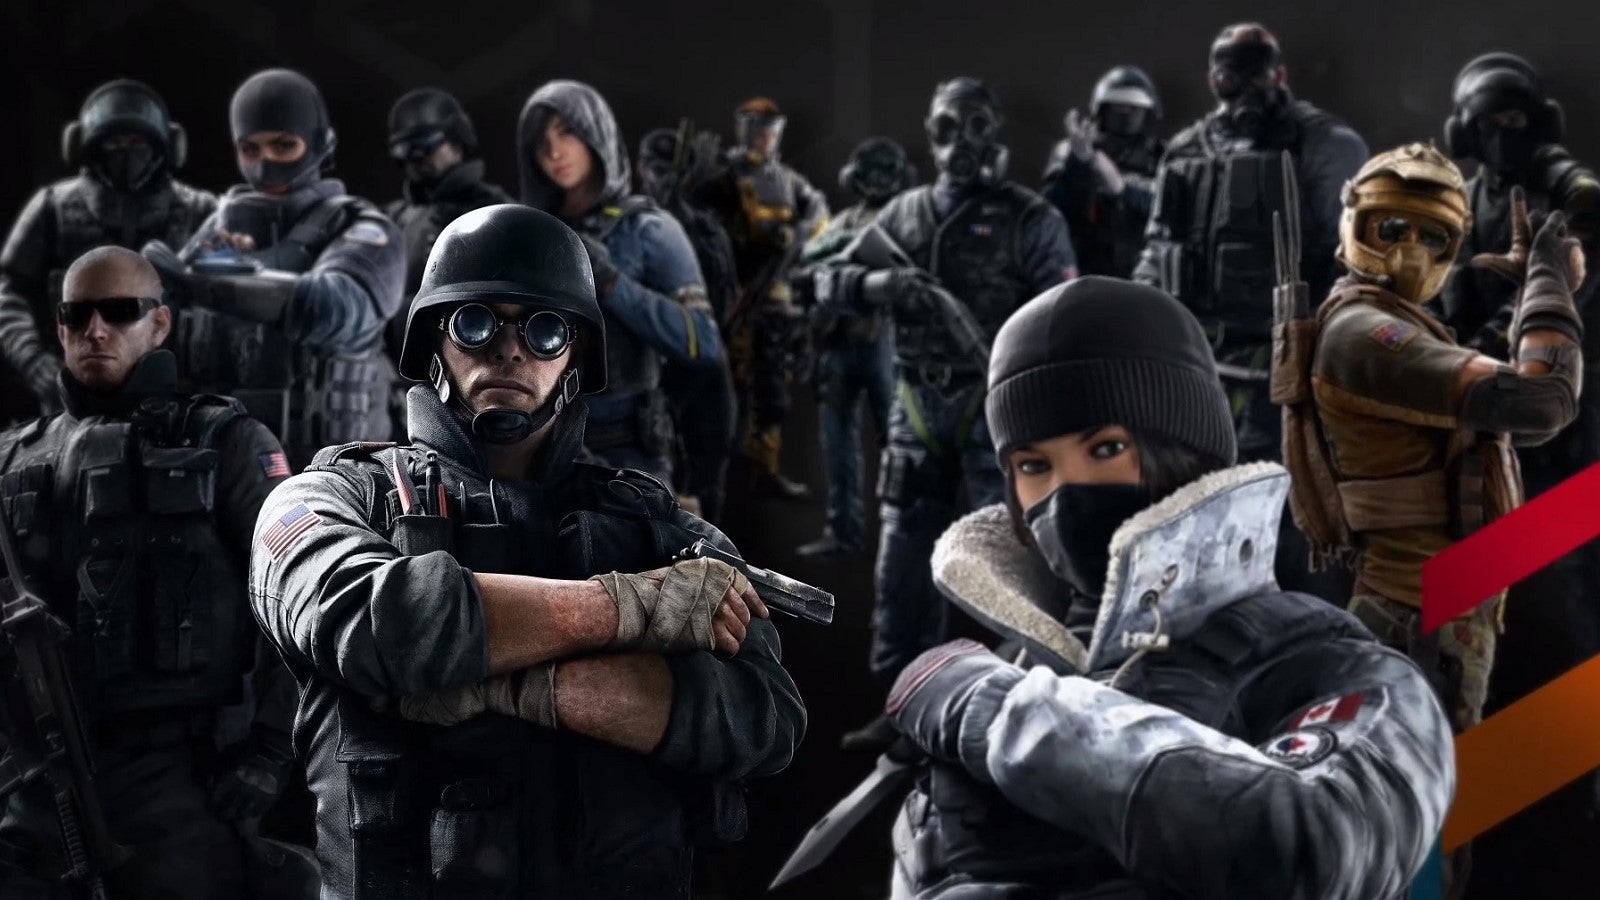 Several operators from Rainbow Six Siege stare dramatically at the camera.